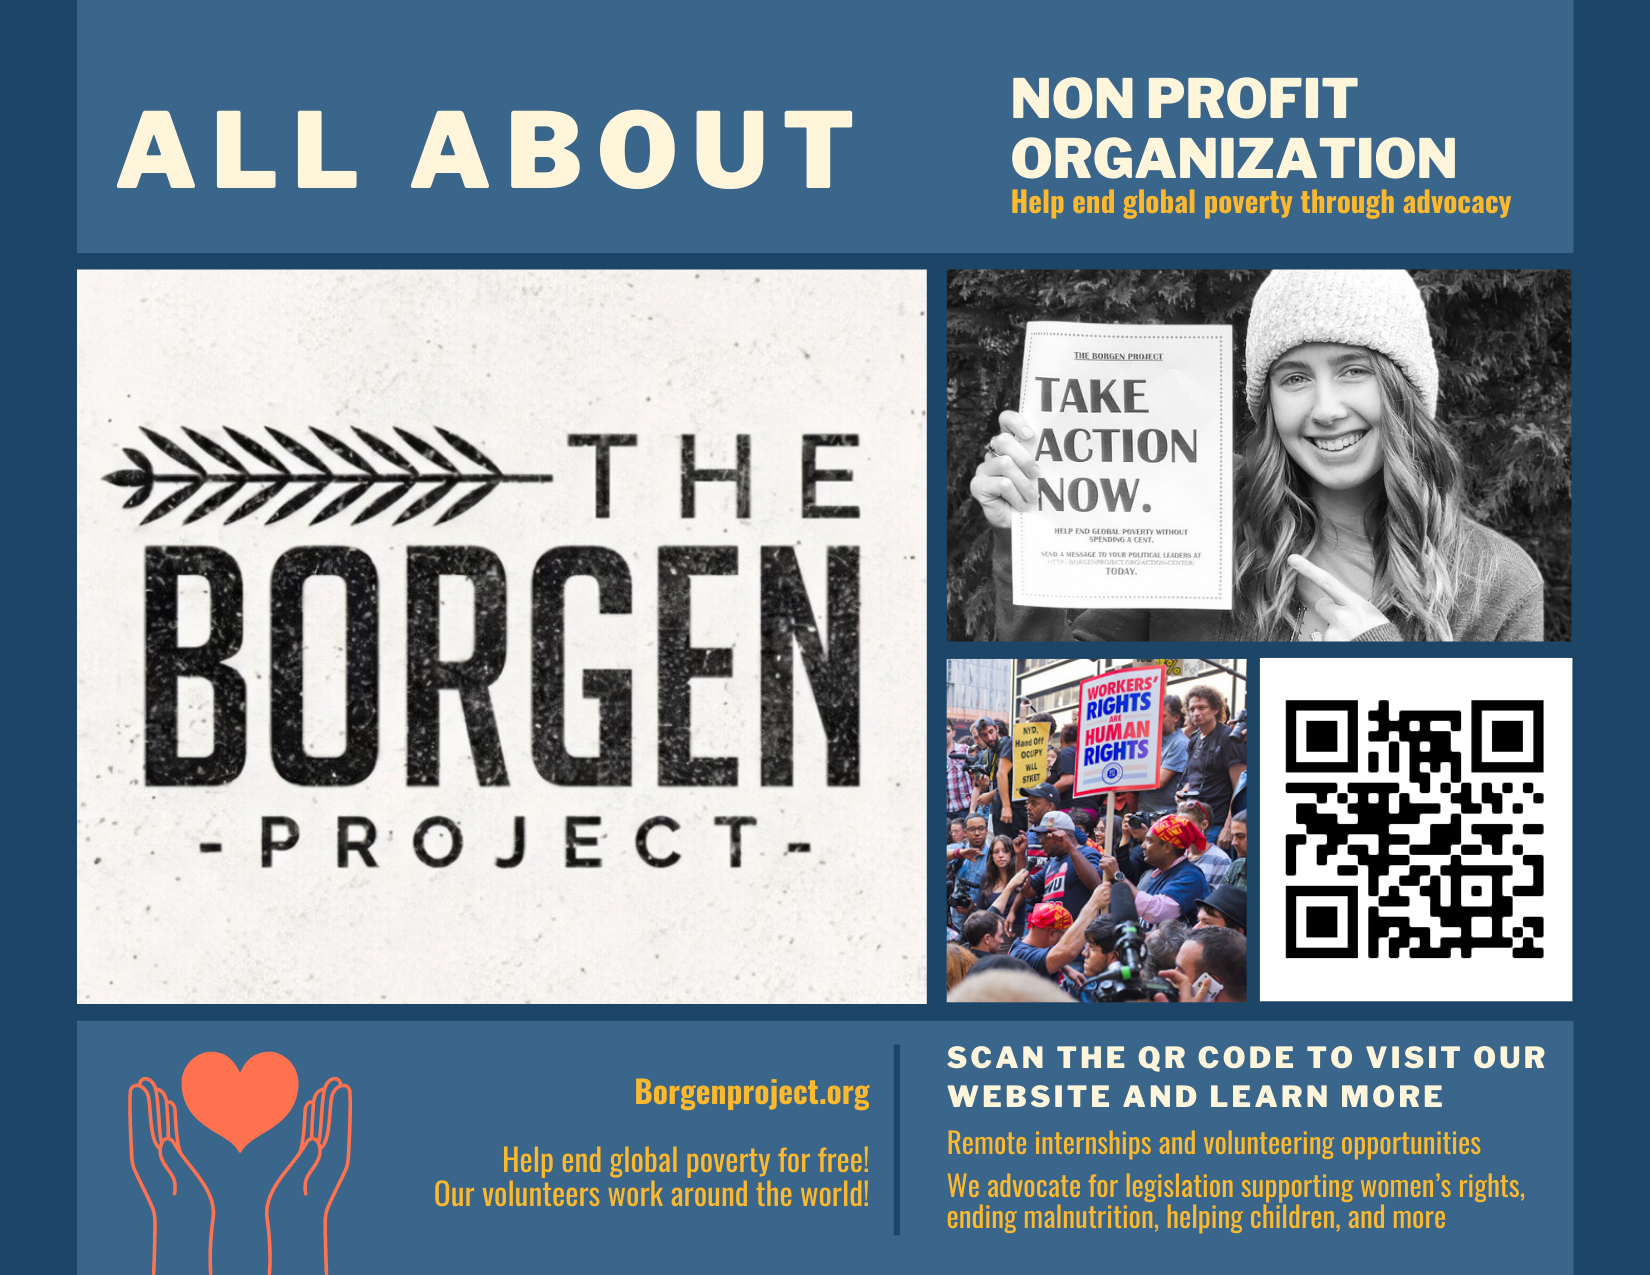 A flyer for The Borgen Project. It has the Borgen Project's logo, which is black and white and has the organization's name. A young person is pictured on the flyer, wearing a hat. Theflyer reads: All about the Borgen Project borgenproject.com help end global poverty for free! Our volunteers work around the world! Remote internships and volunteering opportunities. We advocate for legislation supporting women’s right, ending malnutrition, helping children, and more.